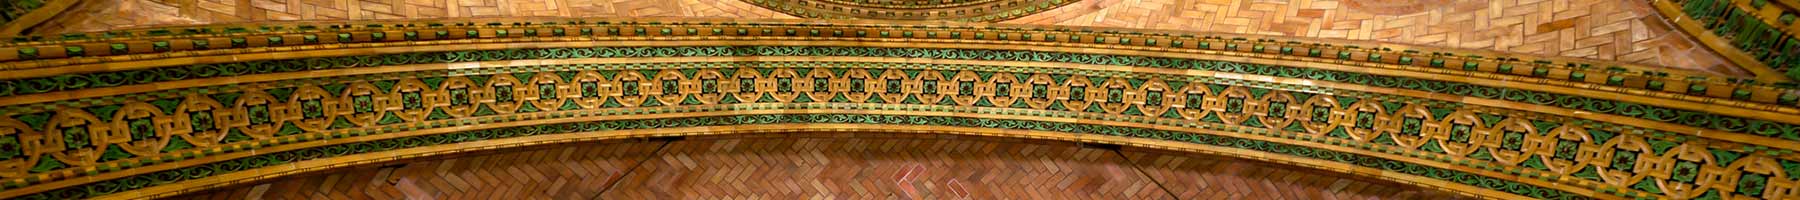 green & golden tiles on a cathedral ceiling: Photograph courtesy of Emil Adiels